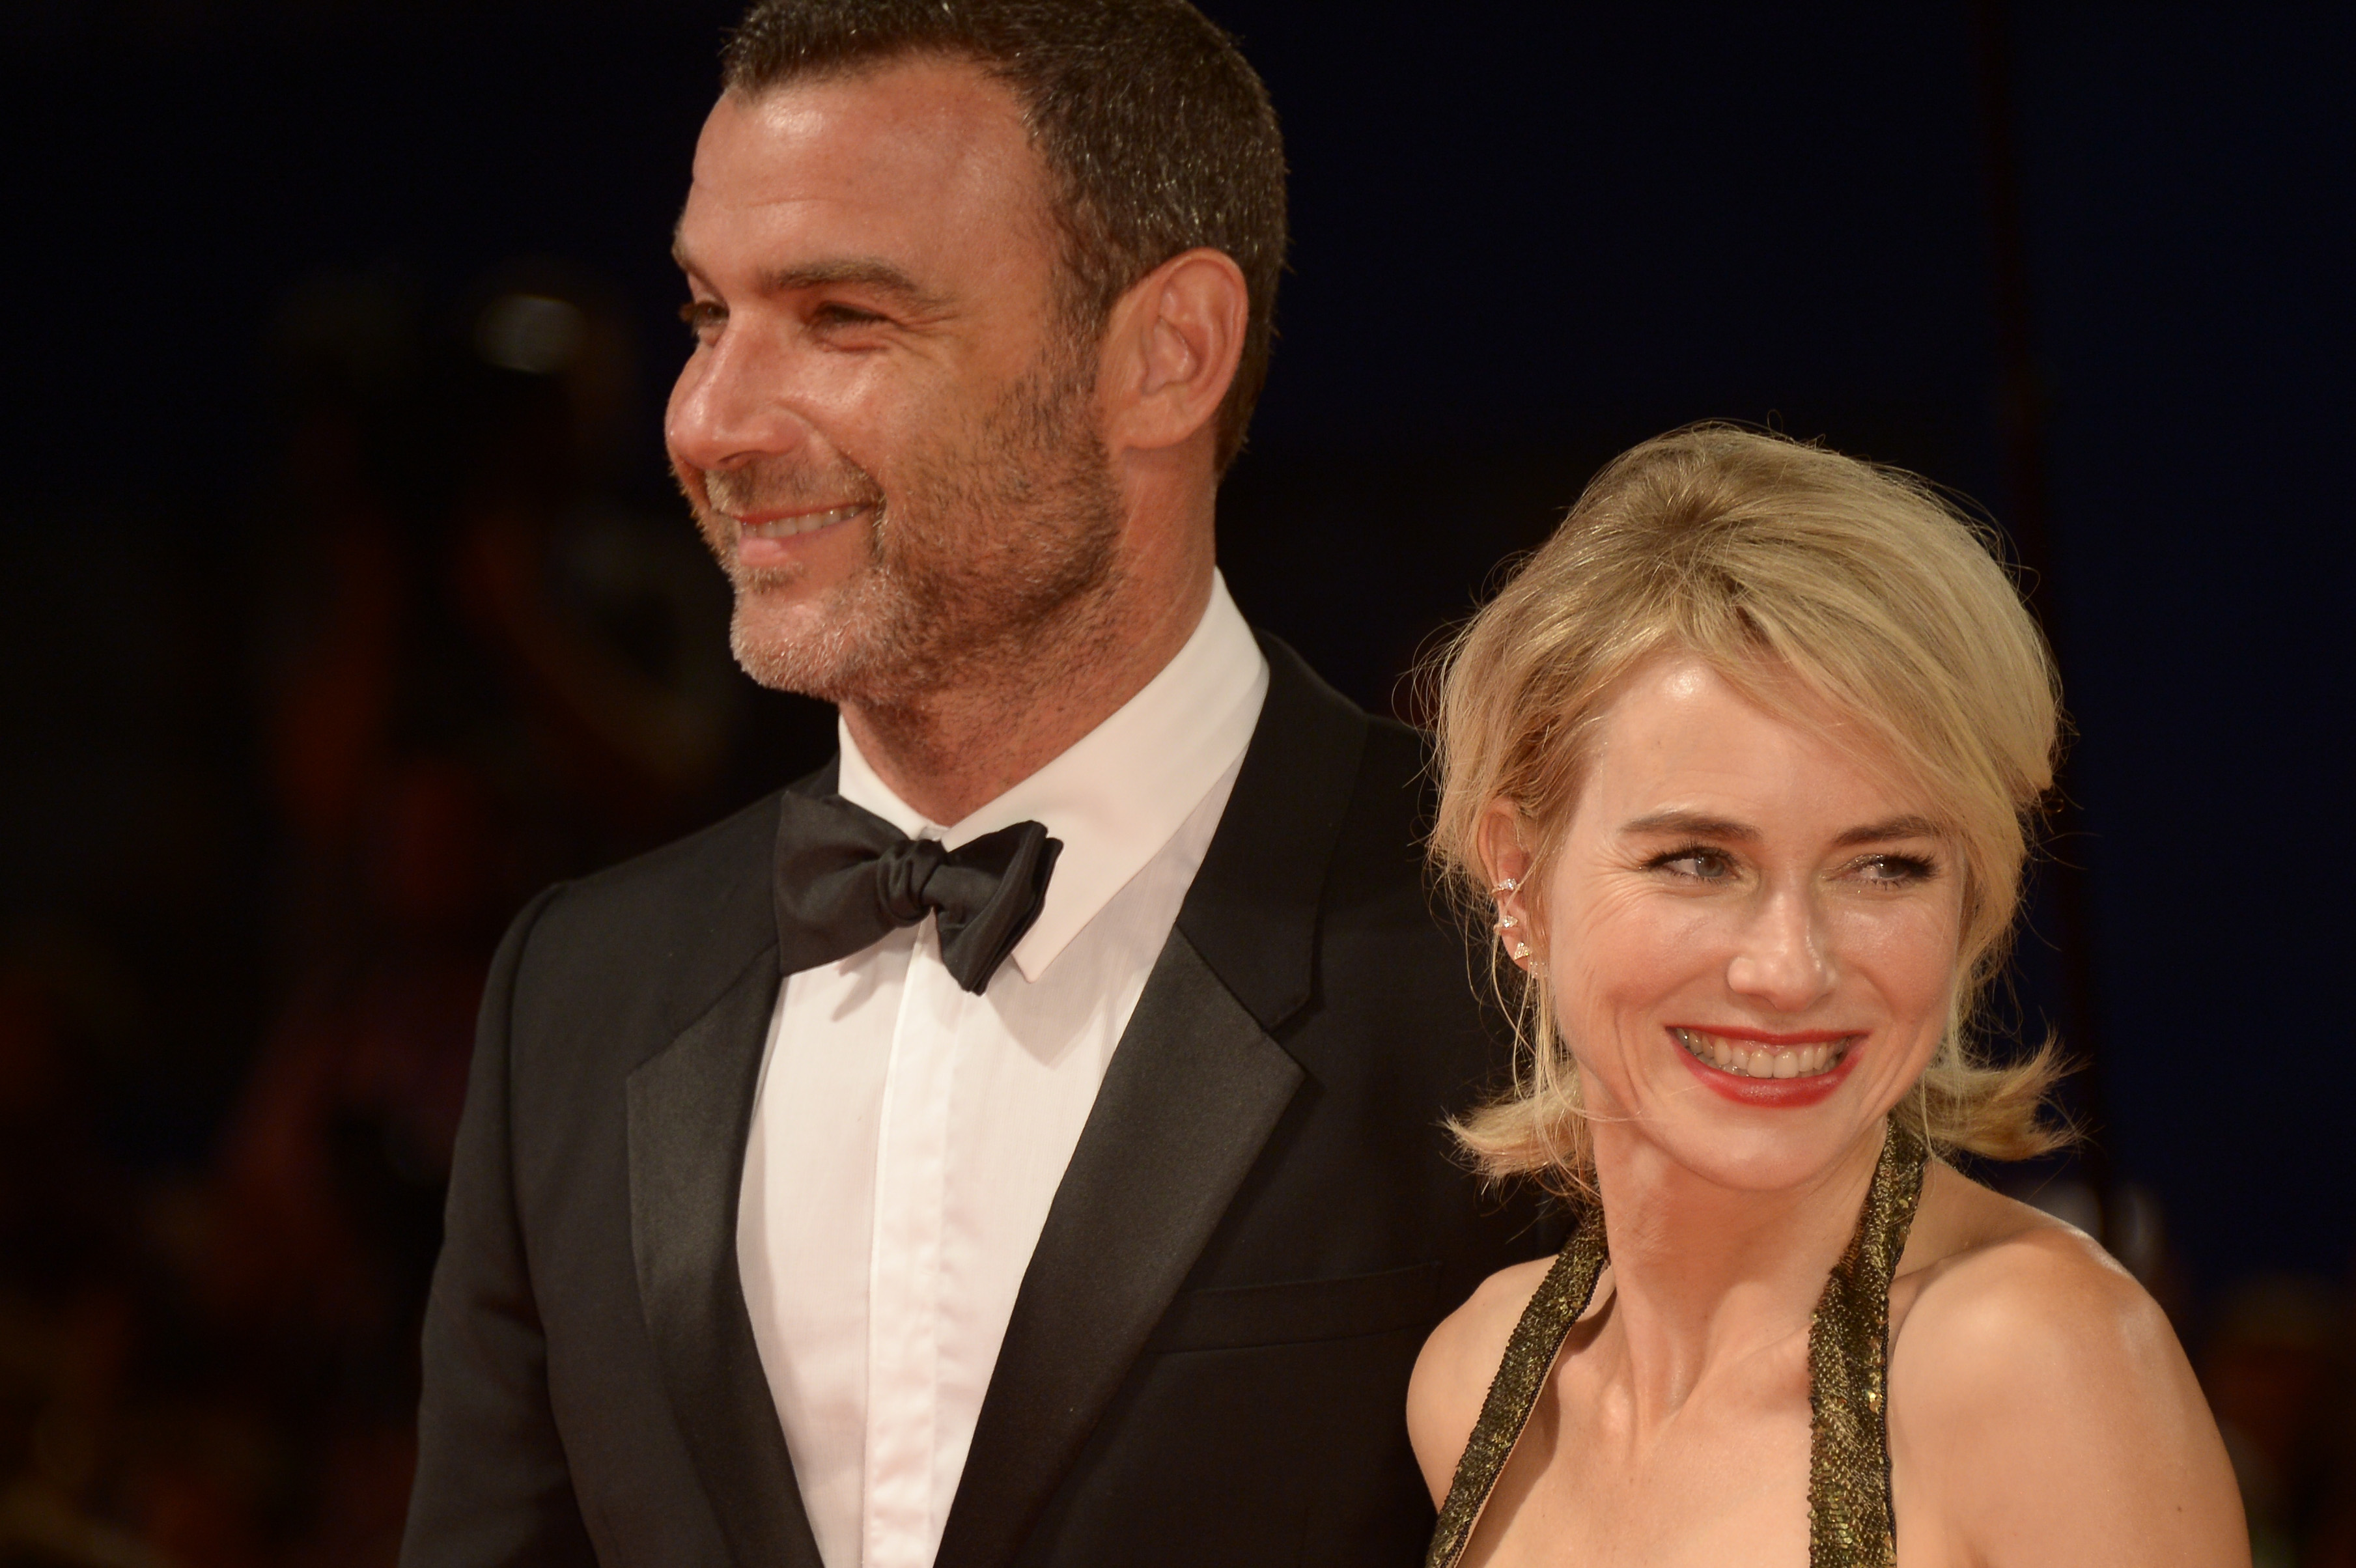 Liev Schreiber and Naomi Watts on September 2, 2016 in Venice, Italy. | Source: Getty Images